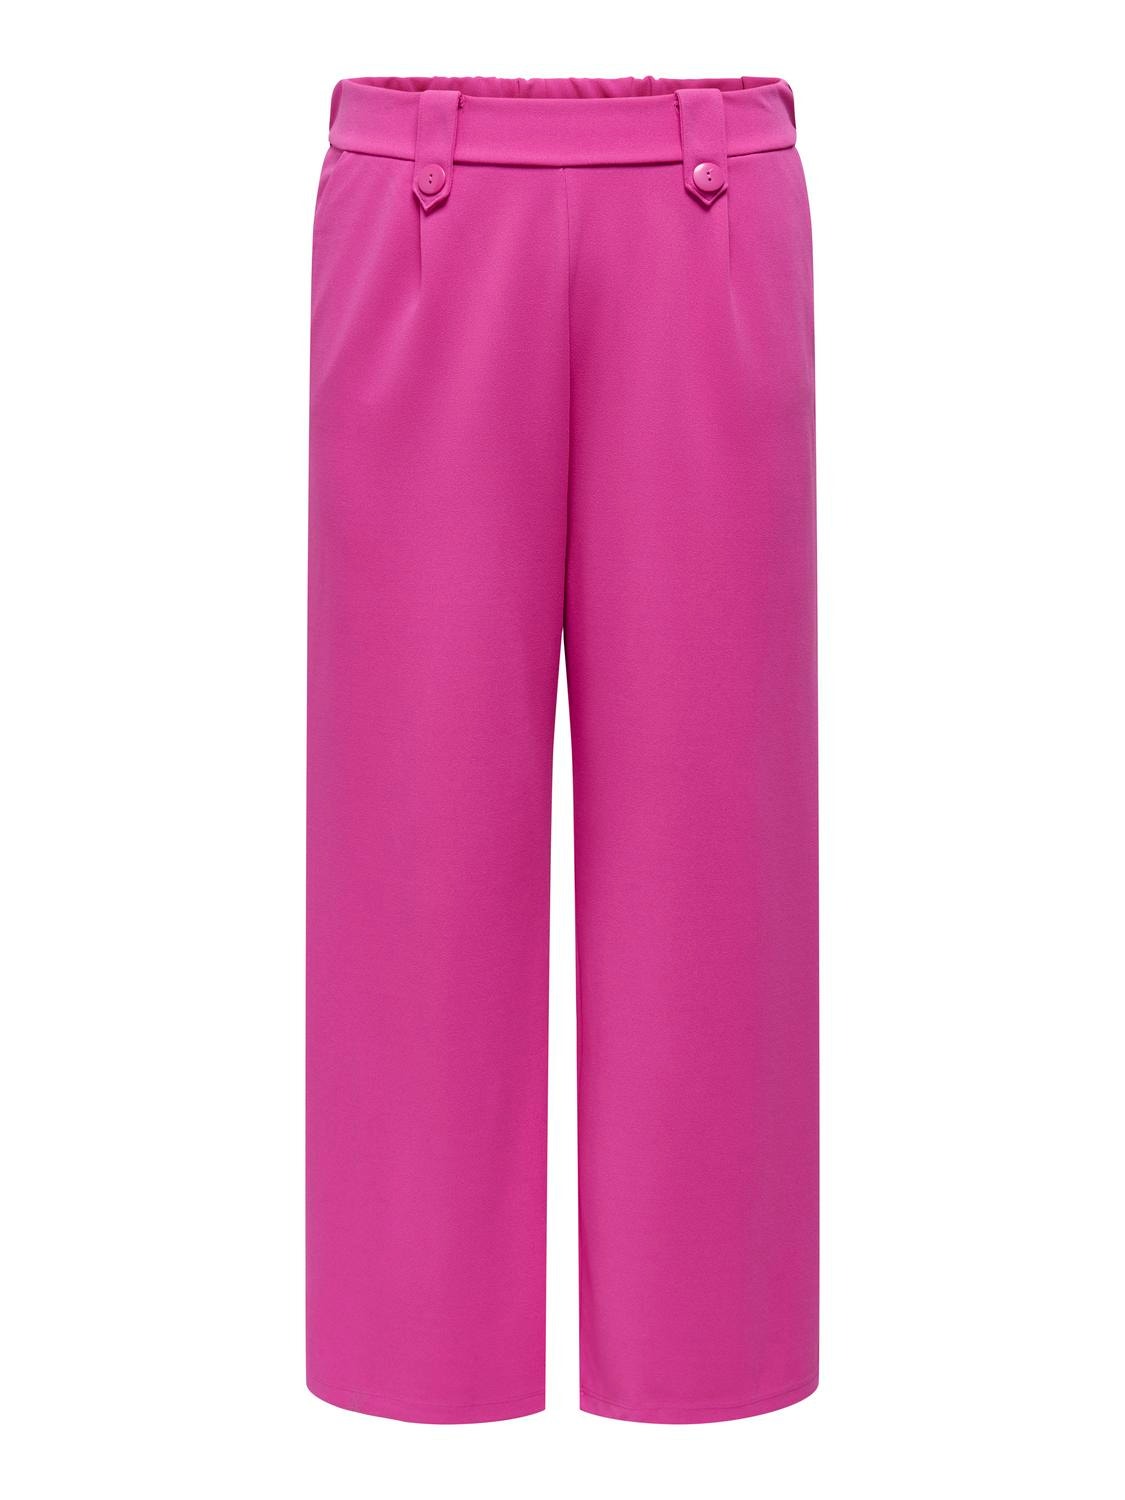 ONLY Curvy pull-up pants -Raspberry Rose - 15293196